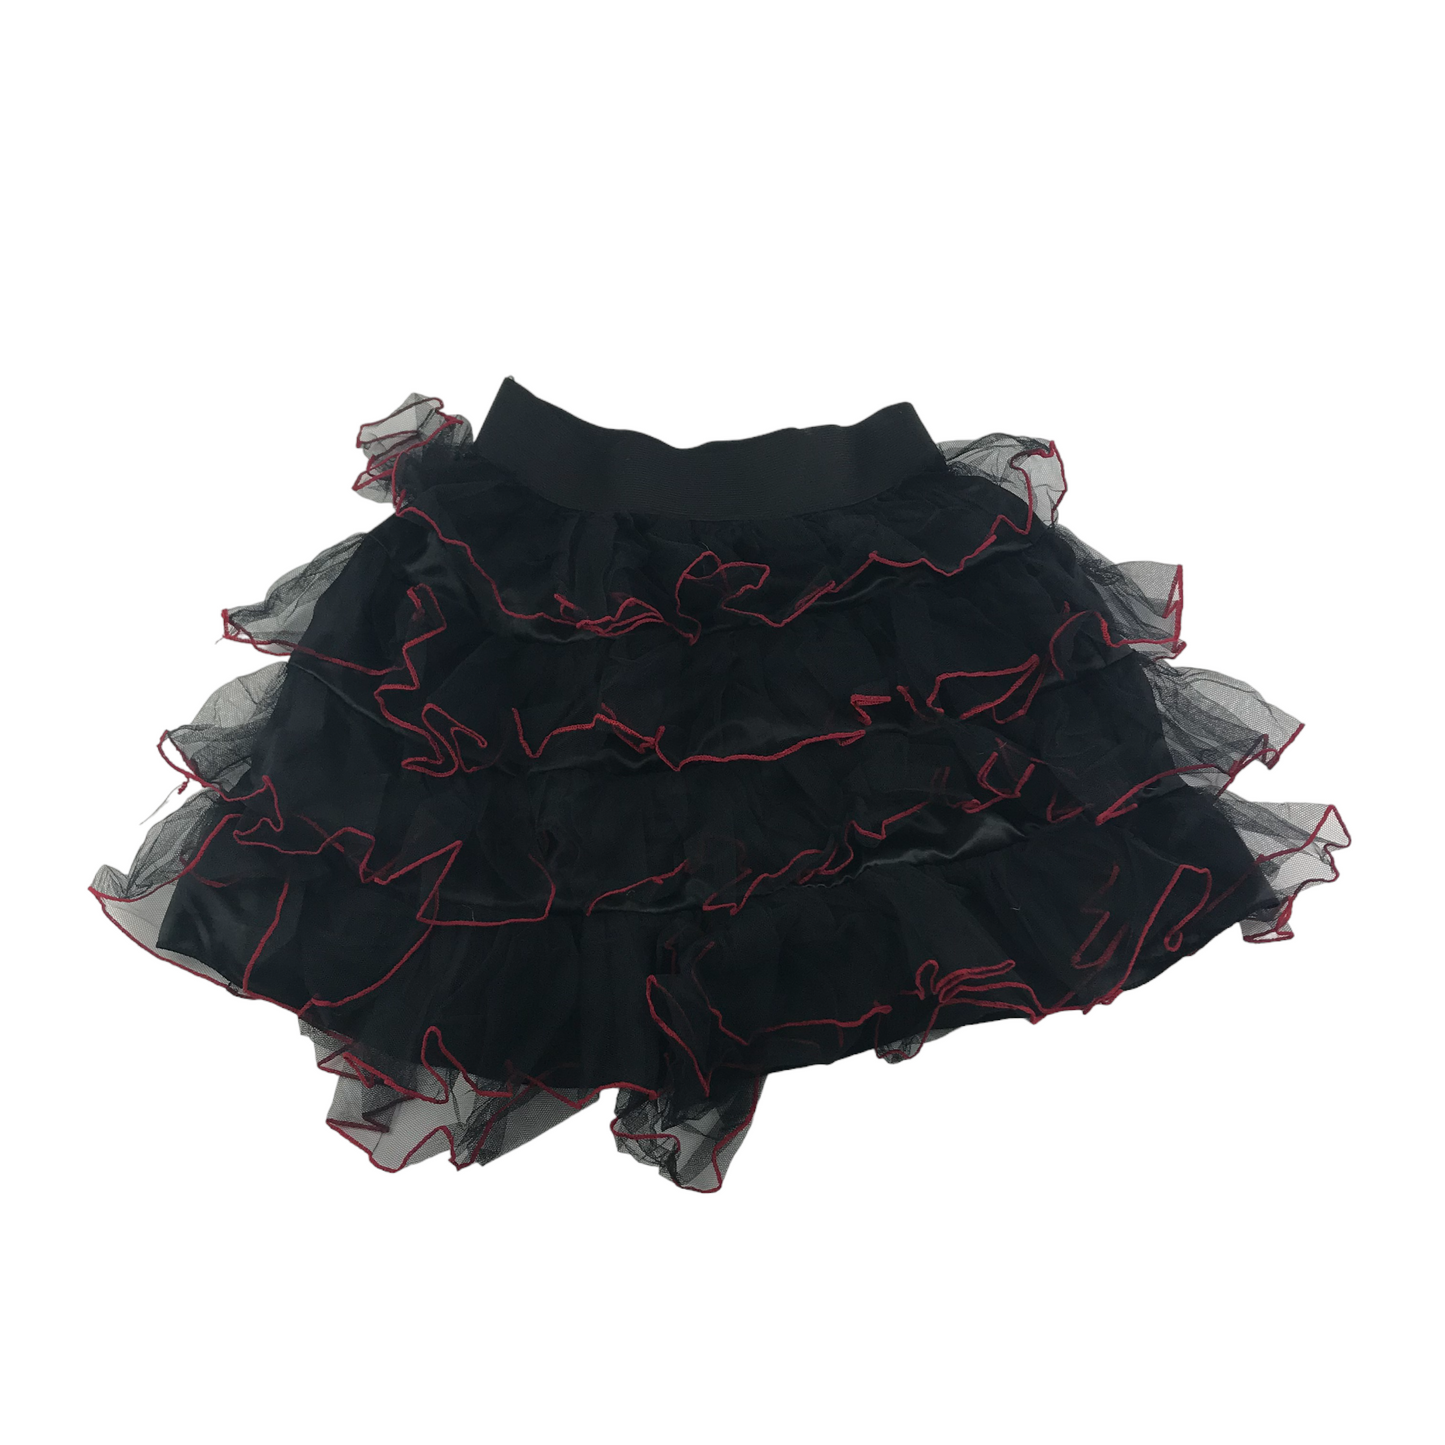 ApparelXchange CIC I Want To Be Parade Marching Band Costume Age 7-8 Red Black Skirt and Jacket Set